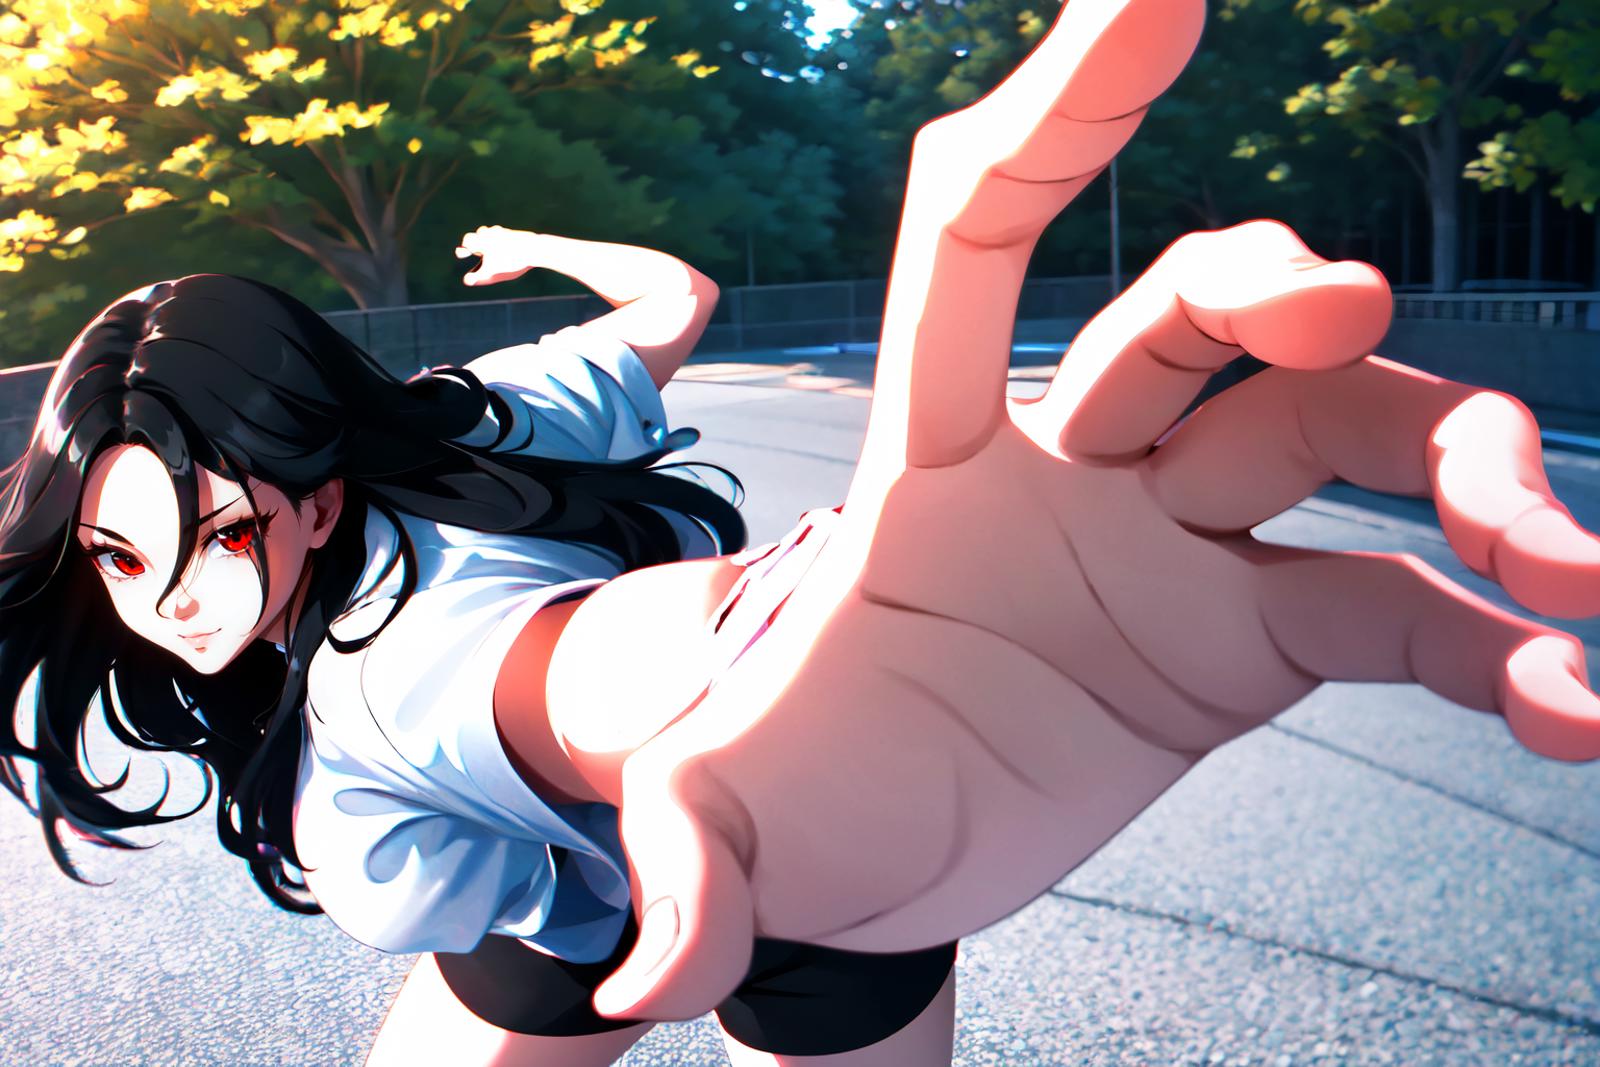 A cartoon image of a woman in a white shirt and black shorts with a hand reaching out towards her.